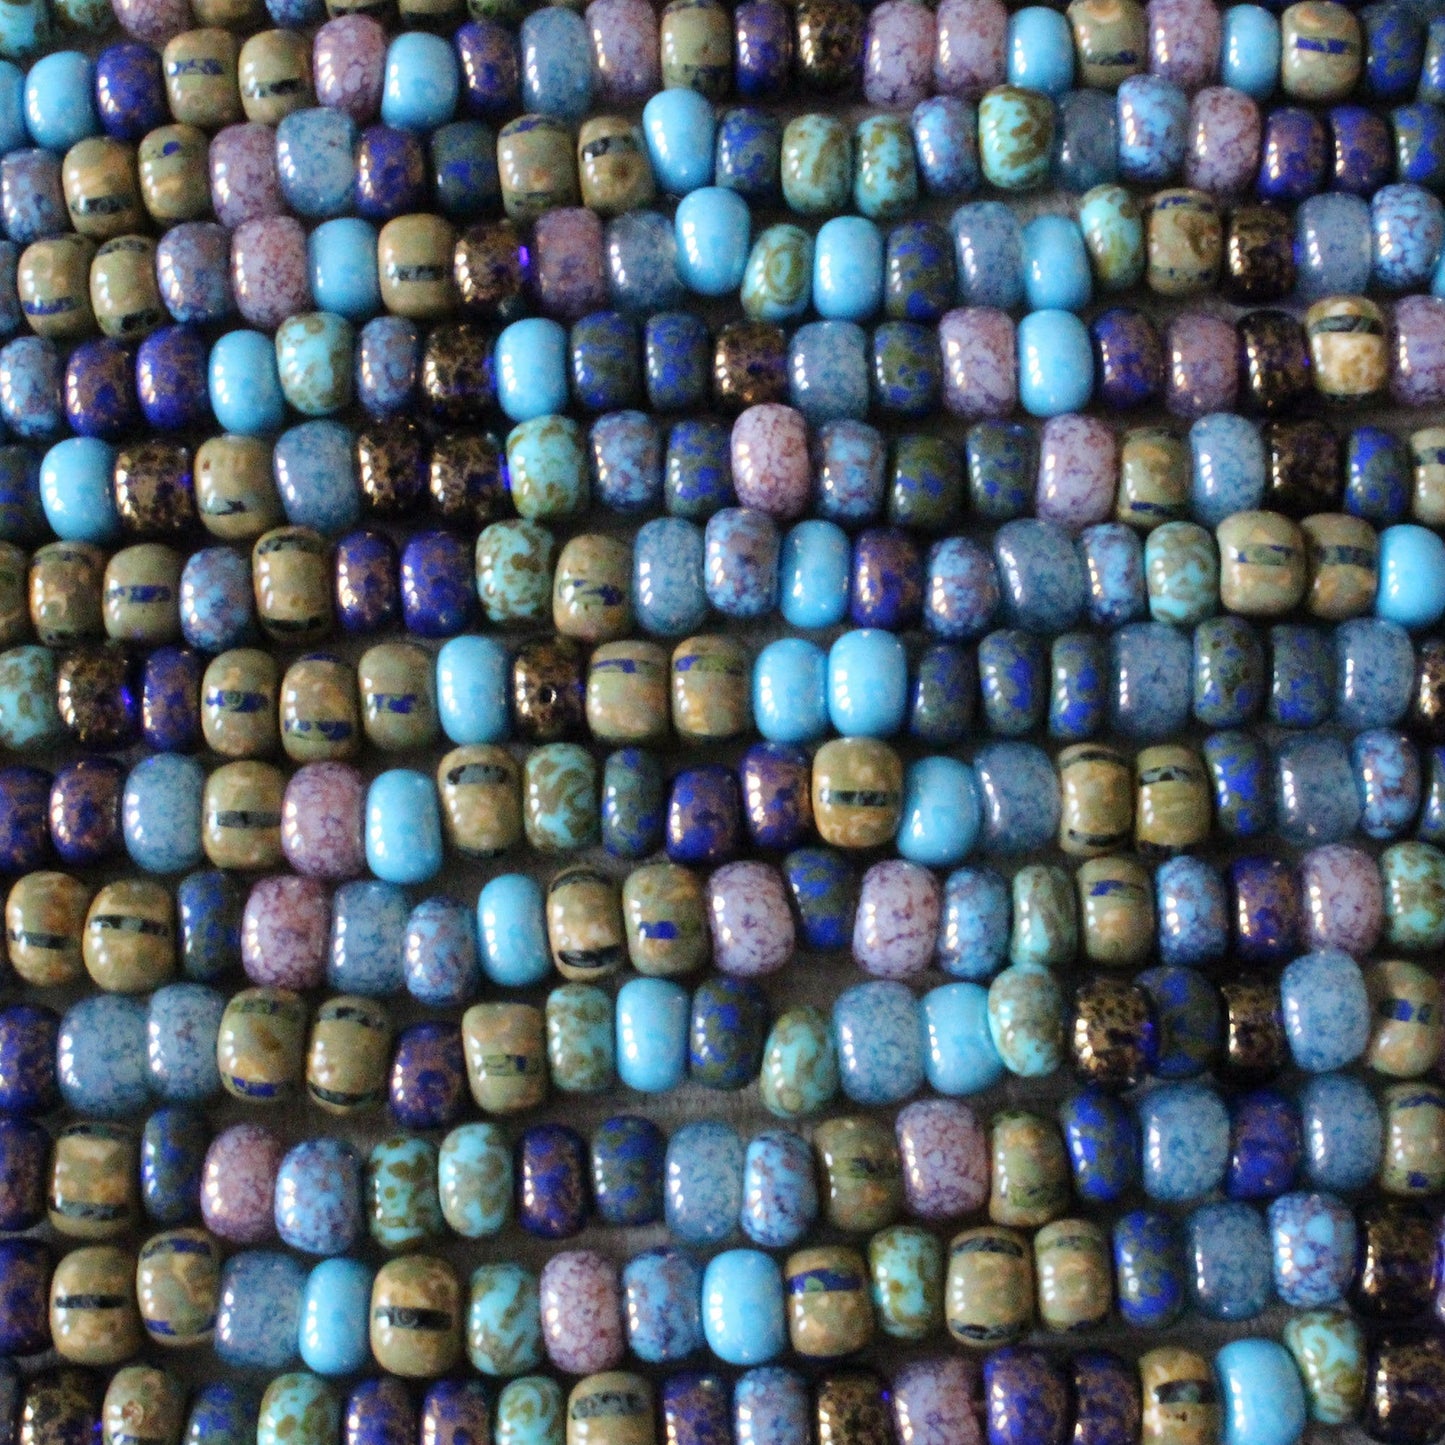 Size 31 Seed Beads - Lavender and Blue Picasso Beads - Choose Amount